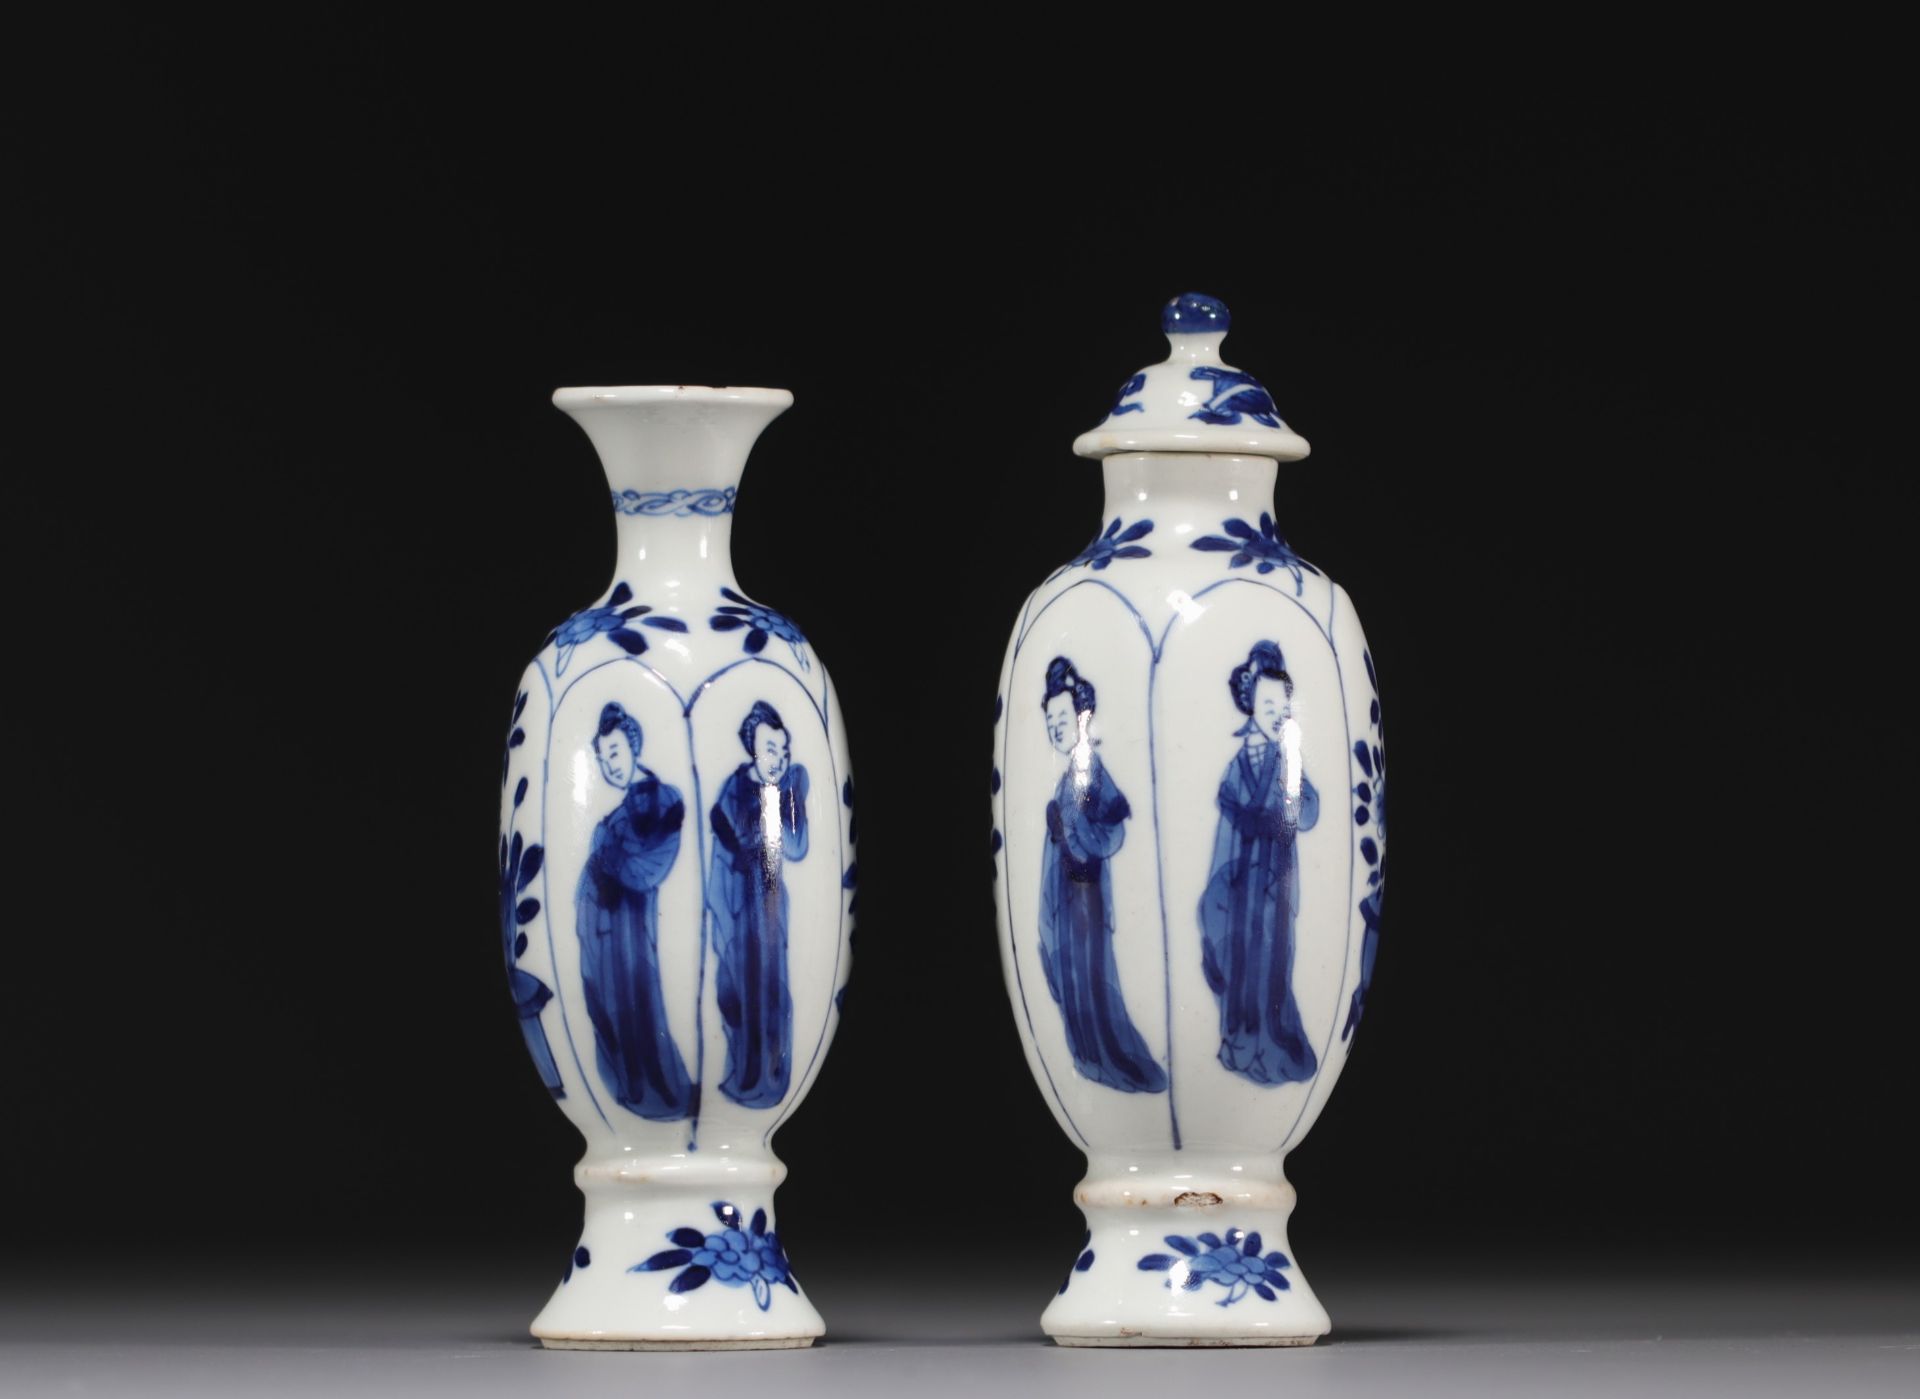 China - Pair of small vases in blue-white porcelain decorated with women, Kangxi period. - Image 3 of 4